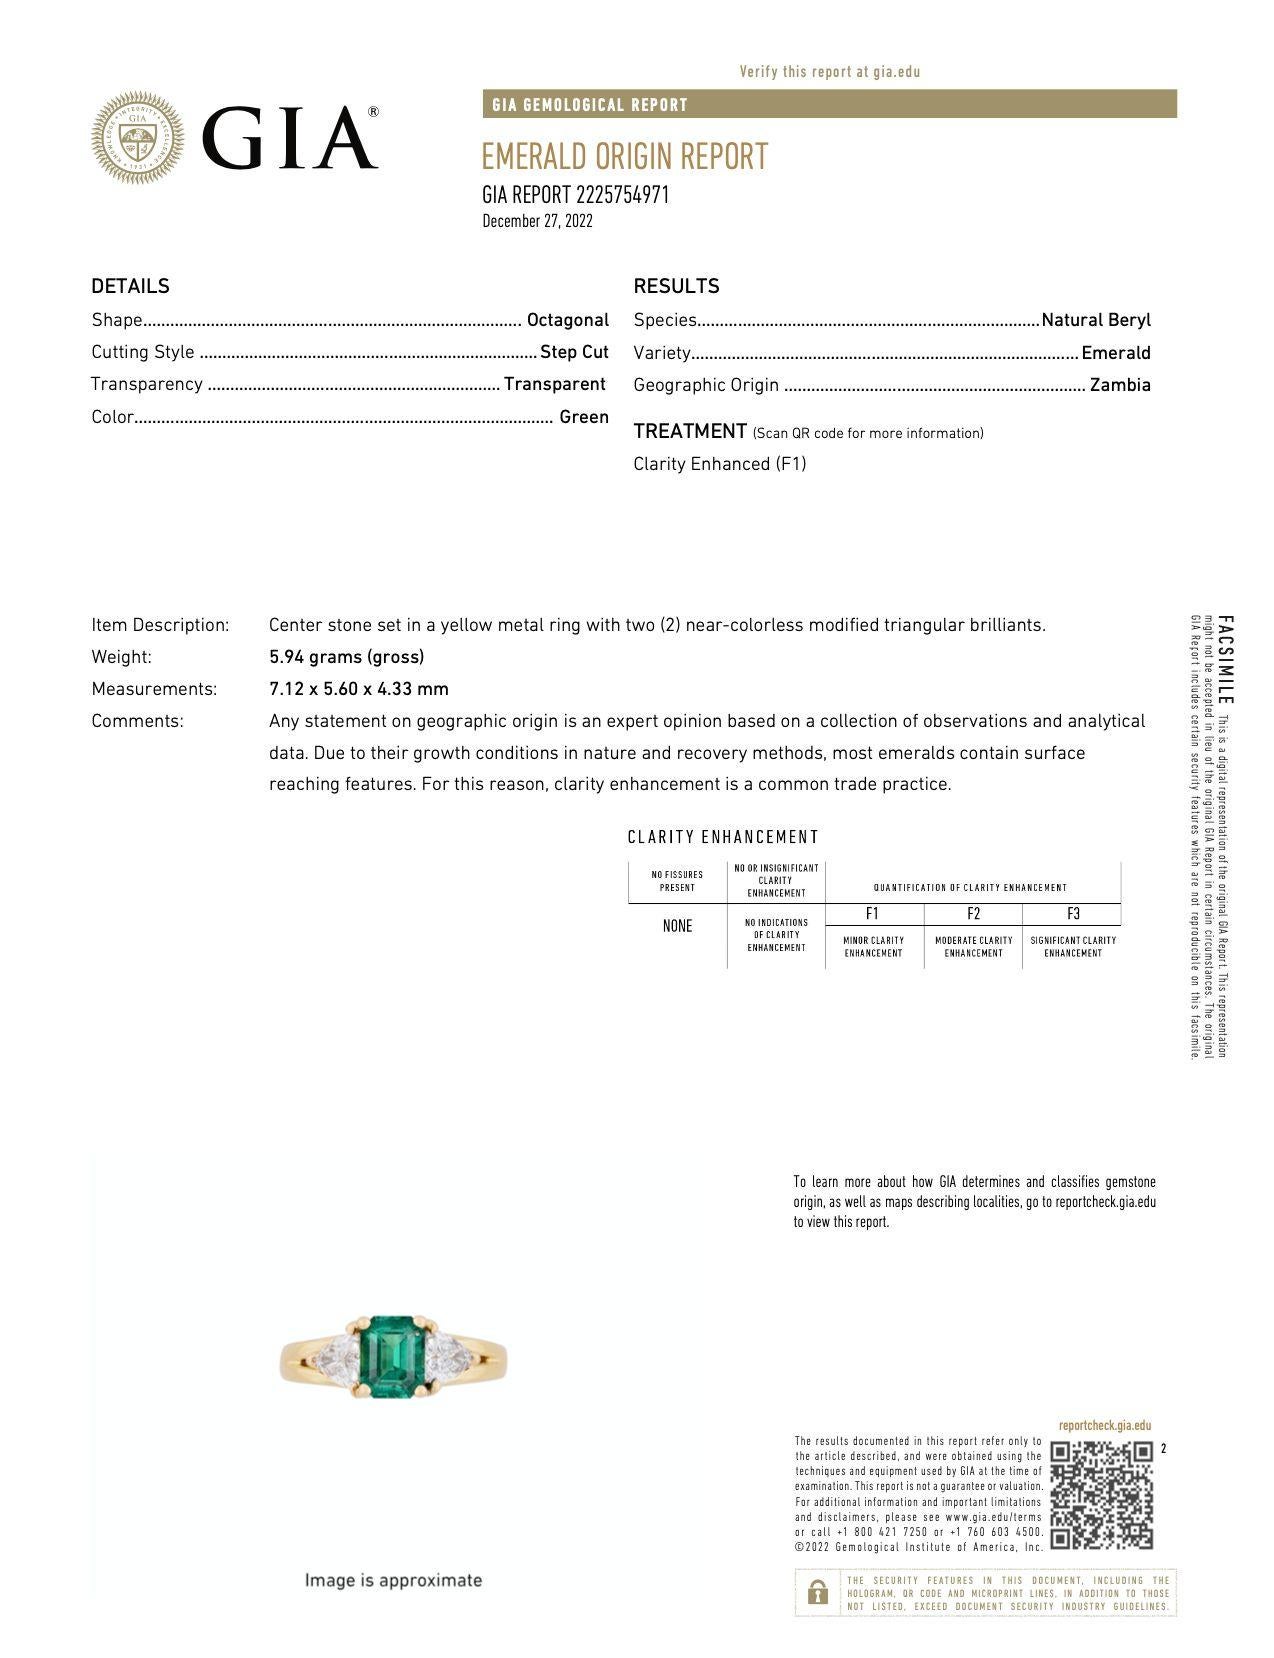 GIA-certified 1.30-carat natural minor oil emerald and trillion cut diamond 3-stone ring in 18 karat solid yellow gold. The emerald center stone features excellent clarity, transparency, and luster. The stone's impressive color and clarity is all